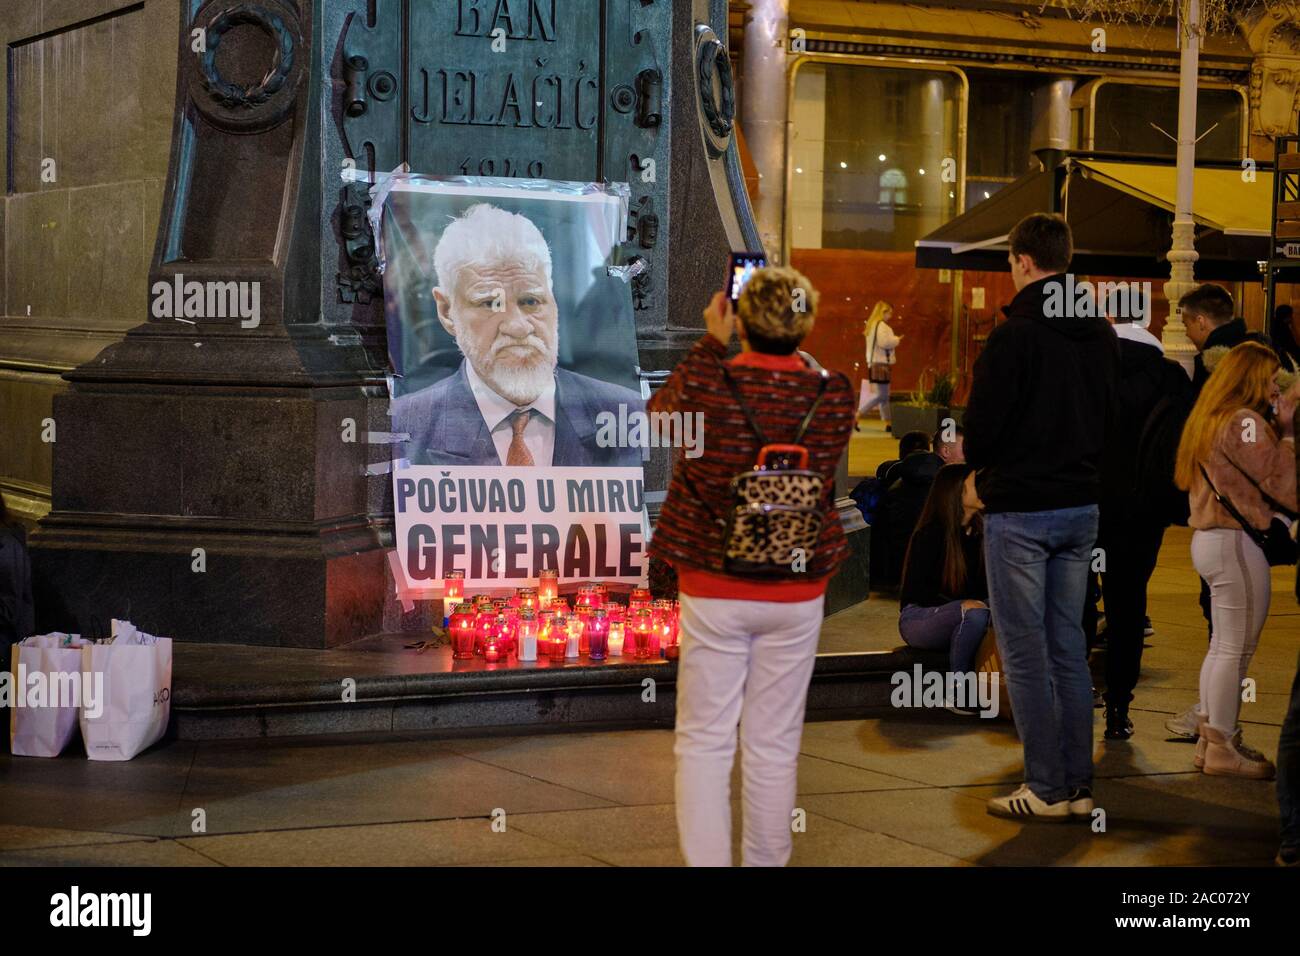 Zagreb, Croatia. 29th November 2019.  Candle light memorial set up for convicted war criminal Slobodan Praljak at foot of Ban Jelačić statue in central Zagreb on the anniversary of his dramatic death.   On this day two years ago, Praljak committed suicide in court in The Hague, Netherlands, after seeing his appeal rejected on the charges of crimes against 'humanity, violations of the laws or customs of war, and grave breaches of the Geneva Conventions' during the Bosnian war.  Message in Croatian meaning “Rest in Peace, General”. Stock Photo